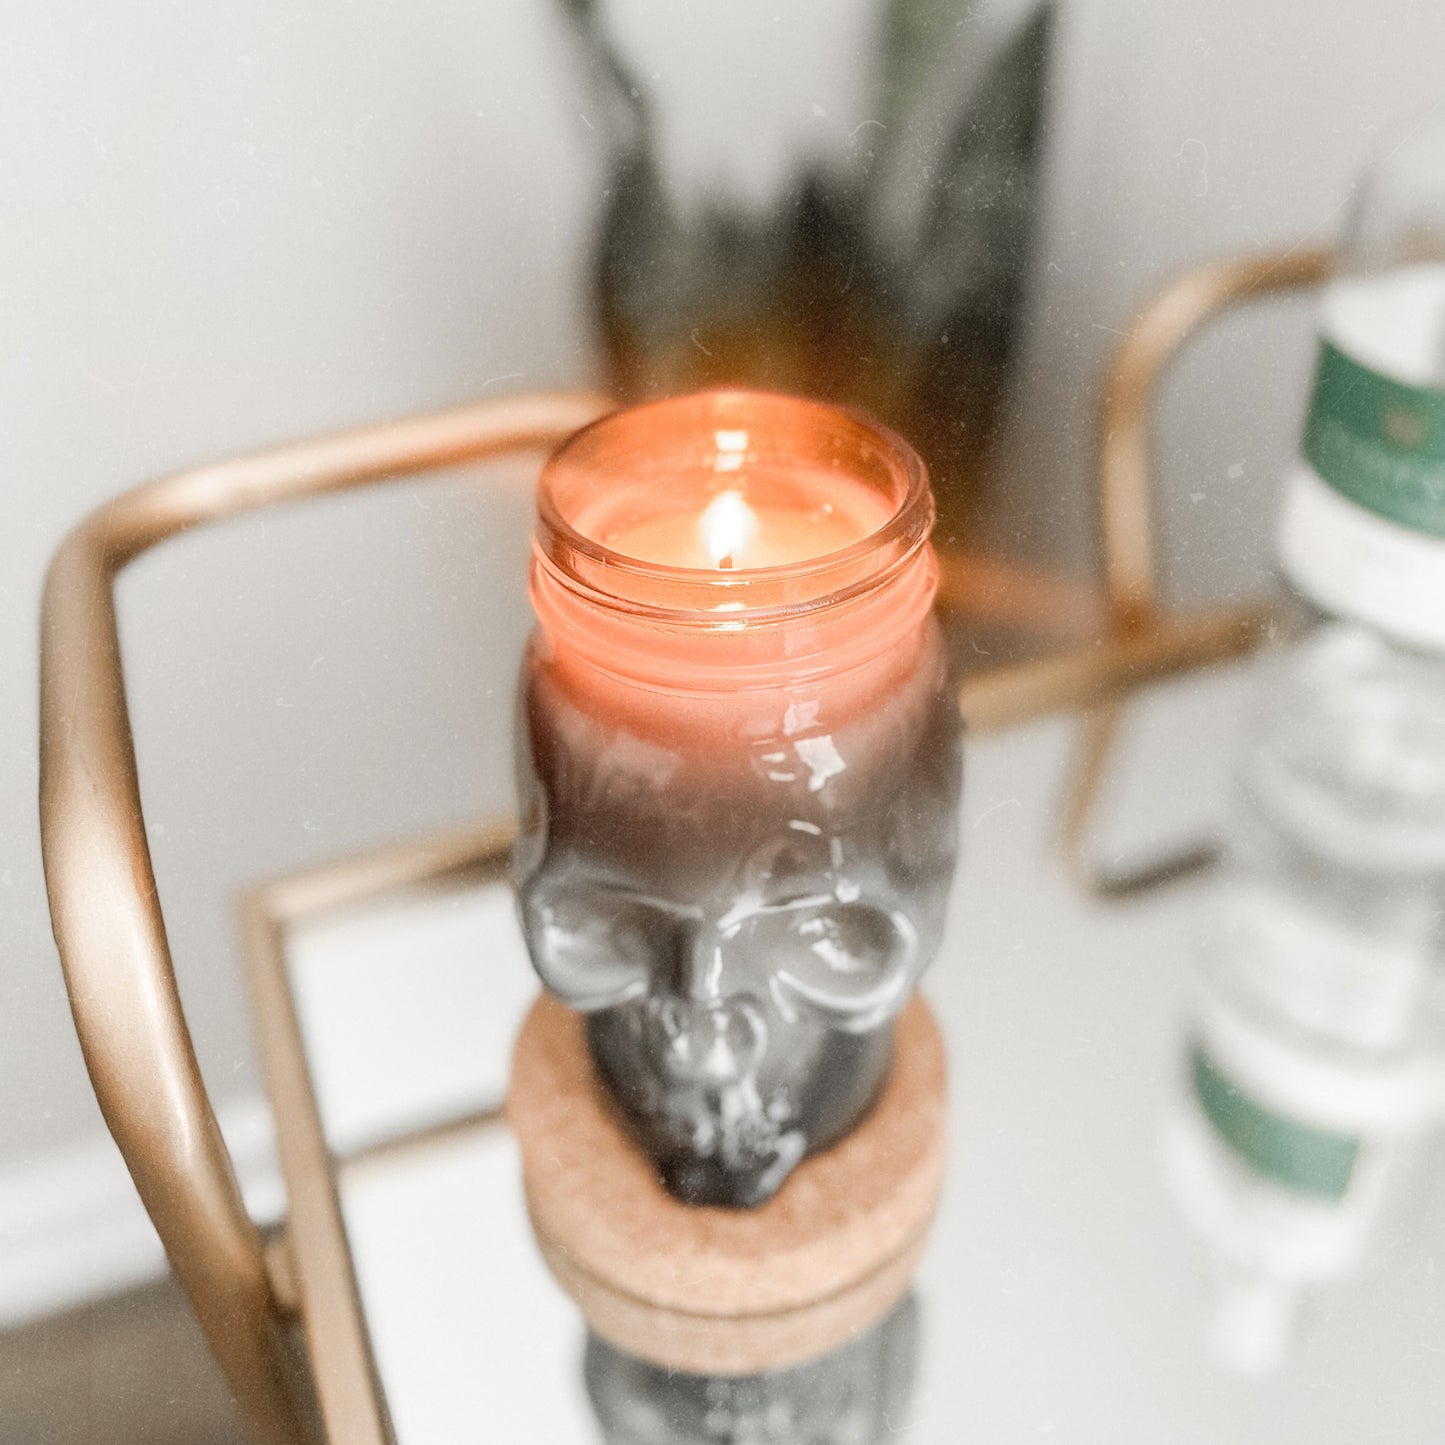 Spooky Skull Candle